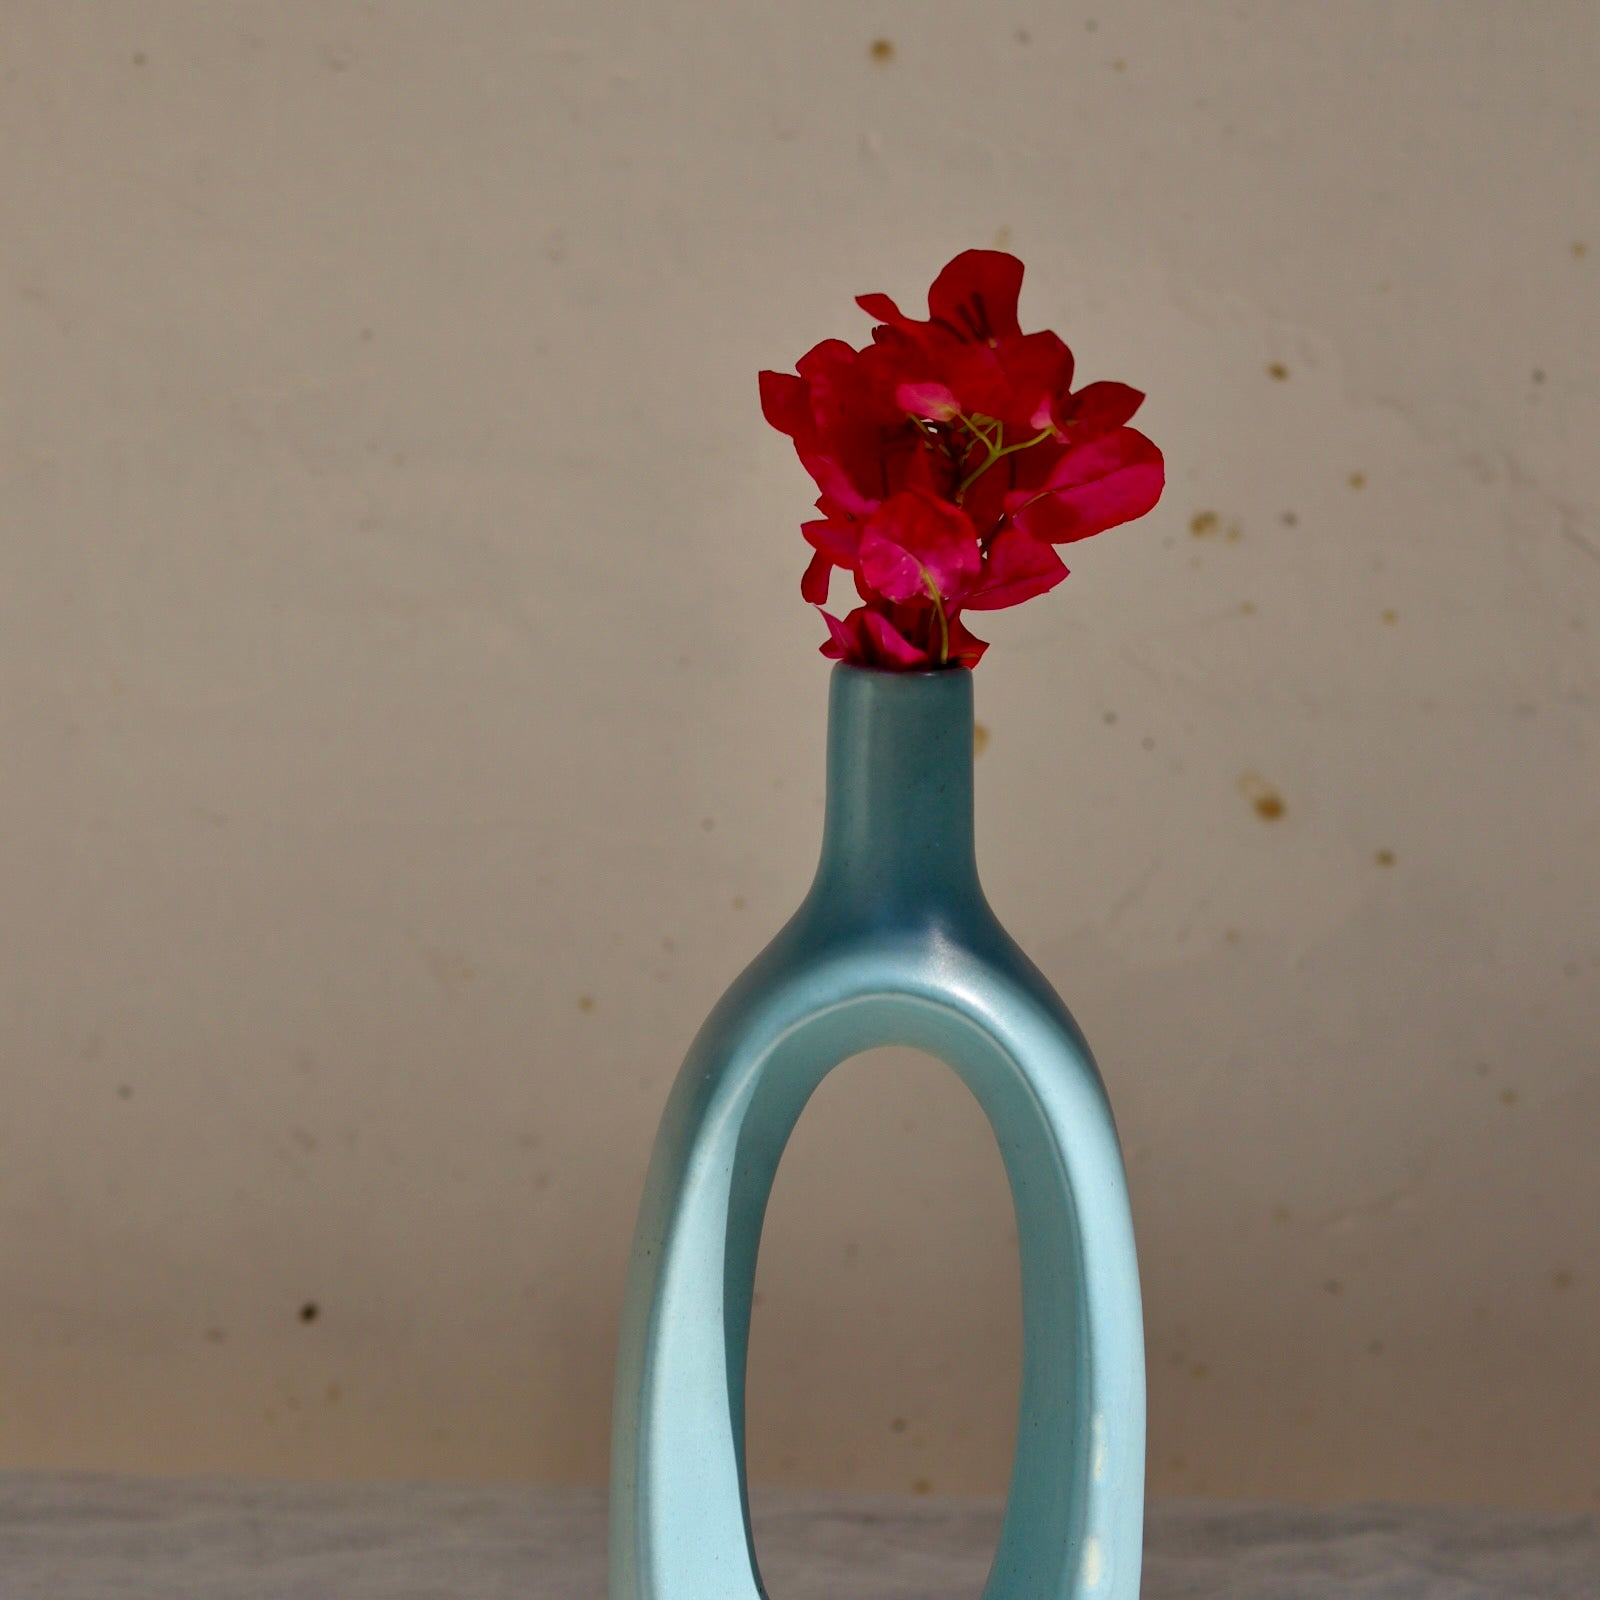 Grey contour vase mid with flowers 